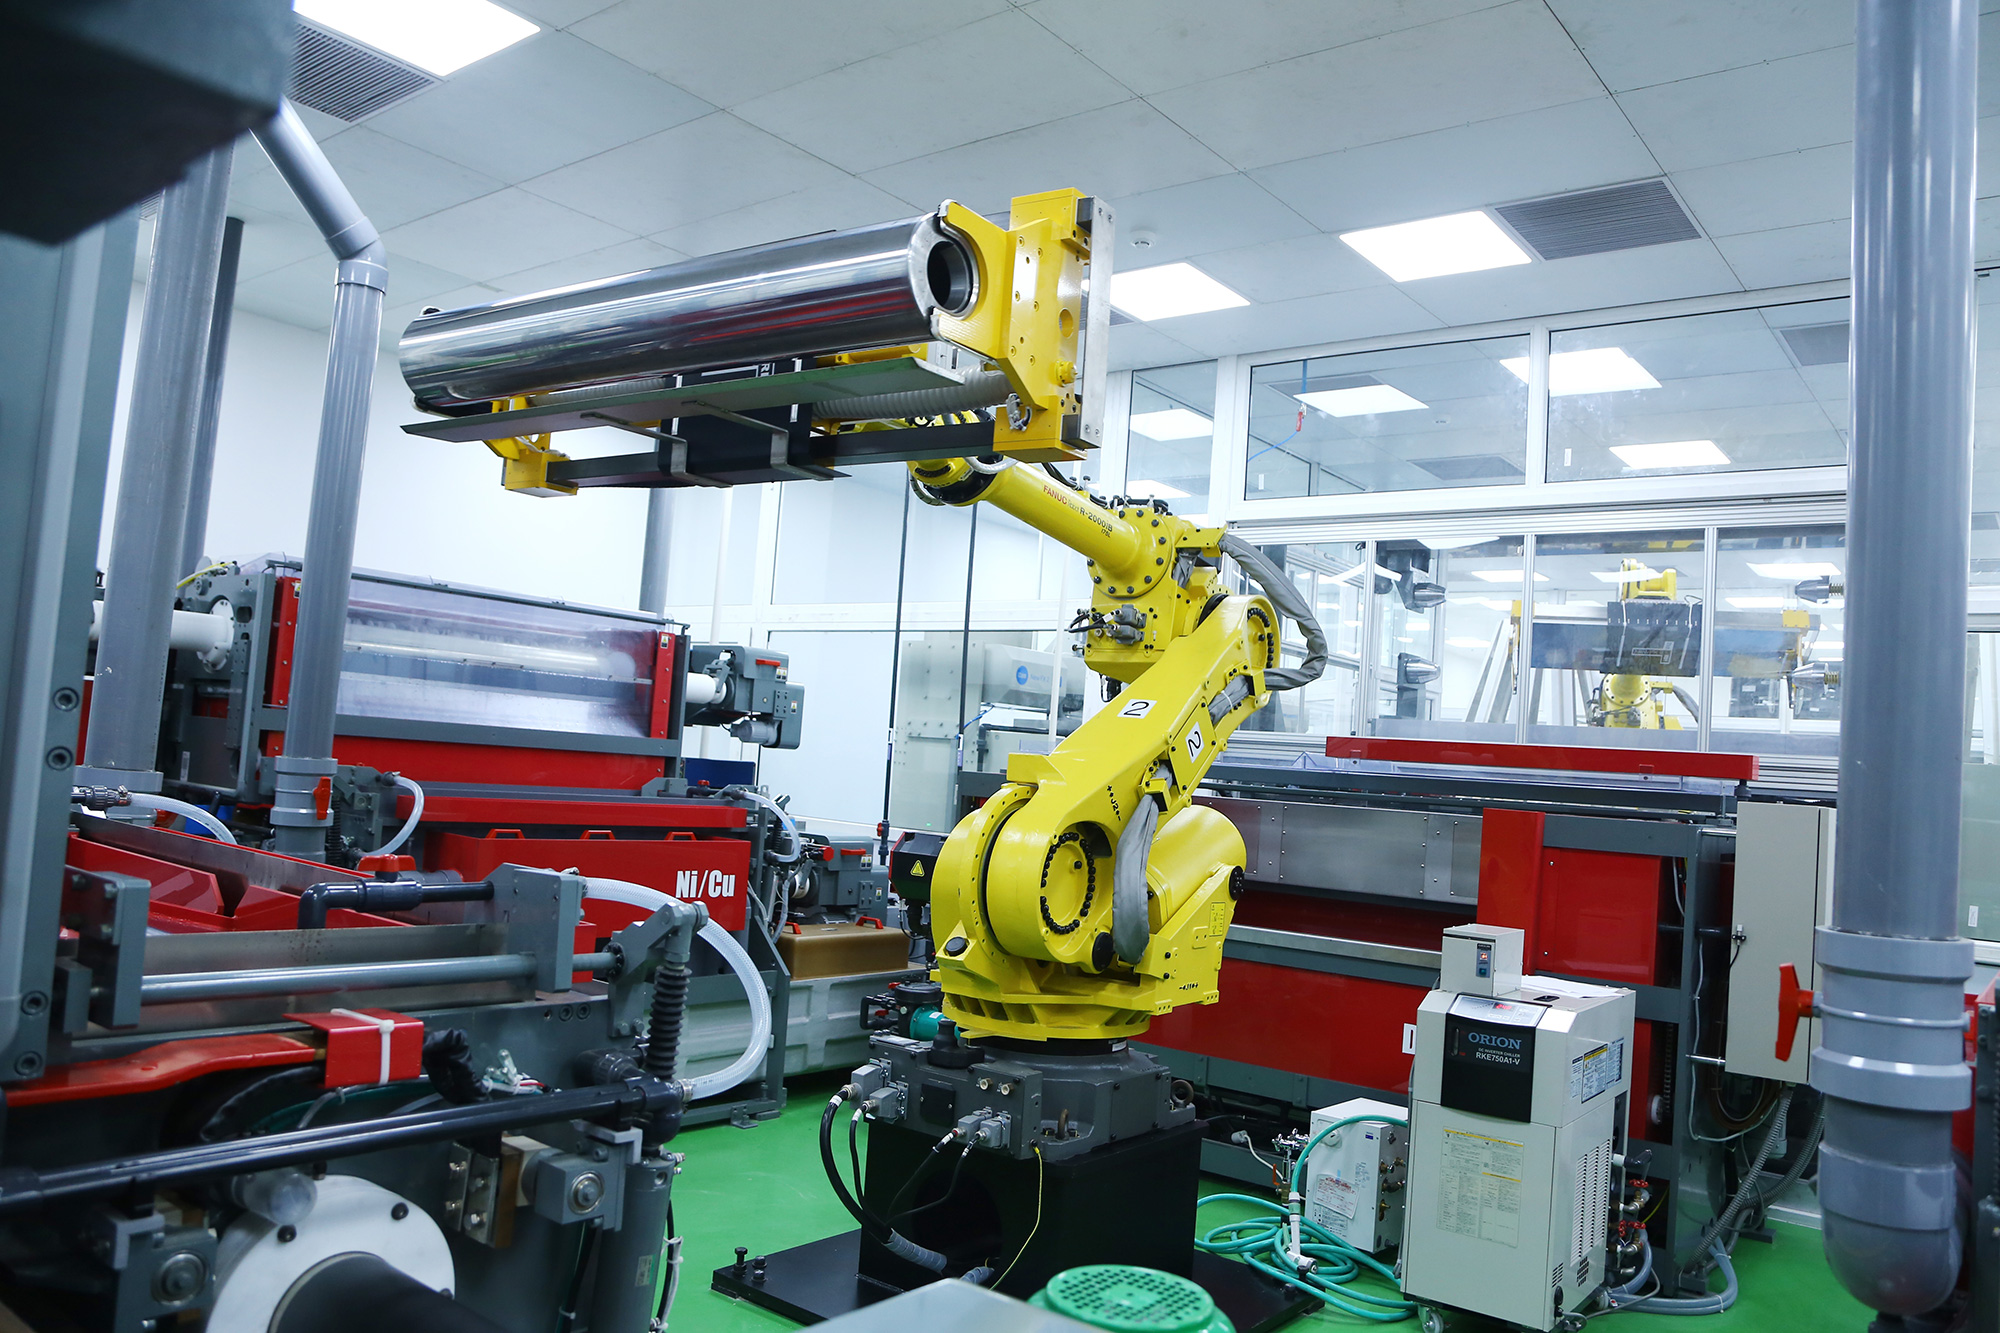 uflex inaugurates 'fully automatic robotic laser engraving line' at noida facility in technical collaborationwithm/s think lab, japan - uflex | blog